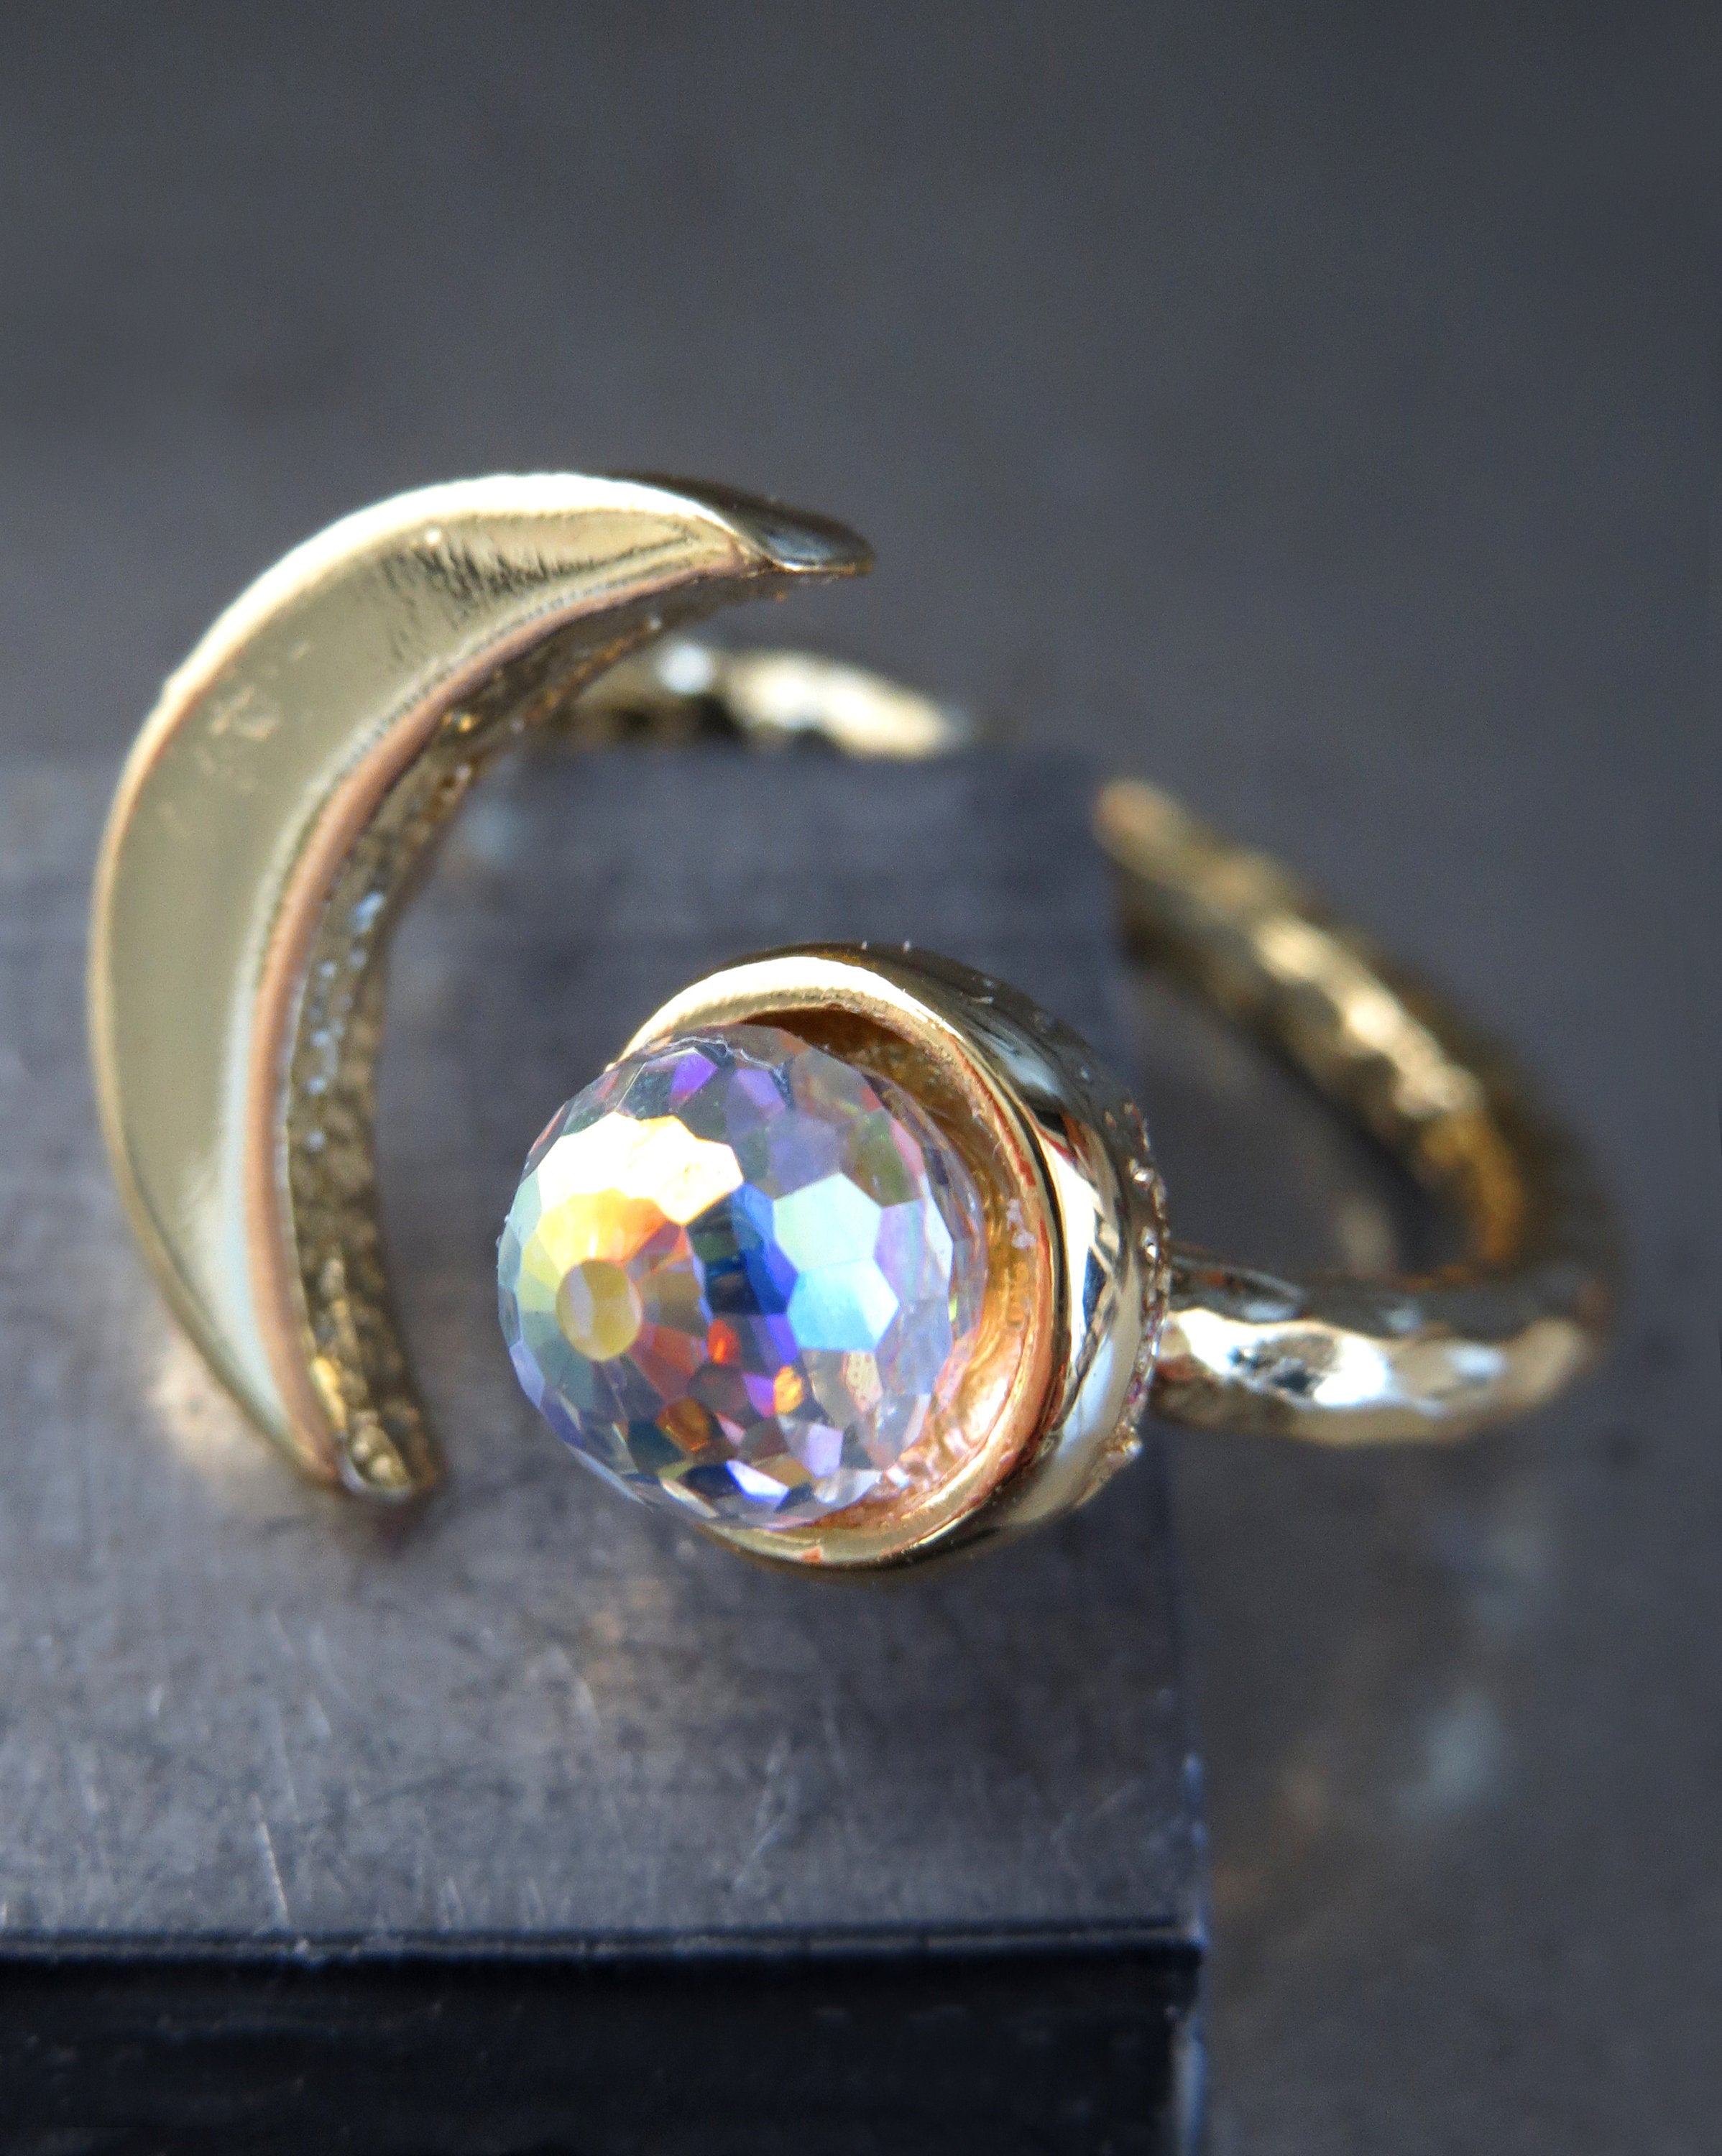 CELESTIAL - Gold Cresent Moon Ring with Vintage Swarovski Crystal with AB Iridescent Finish - Romantic Gift for Teen Girl, Teenager, Women